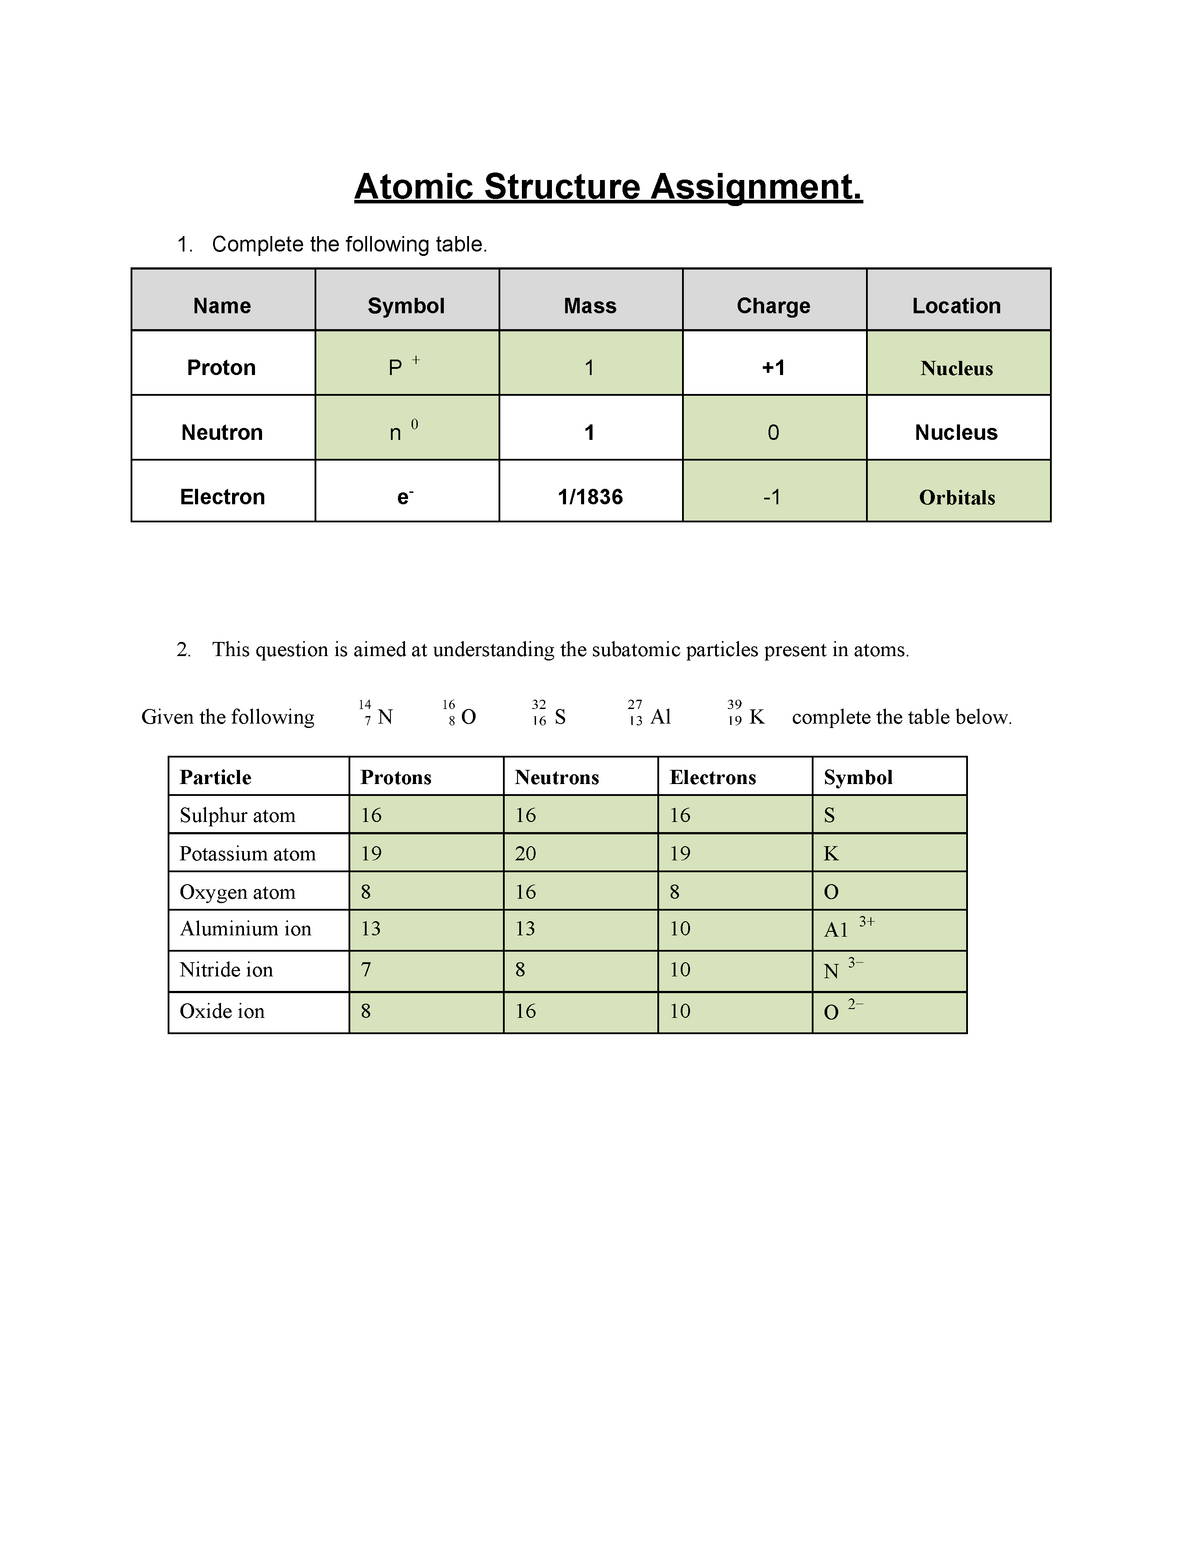 22-22 Atomic Structure worksheet - Atomic Structure Assignment For Subatomic Particles Worksheet Answers